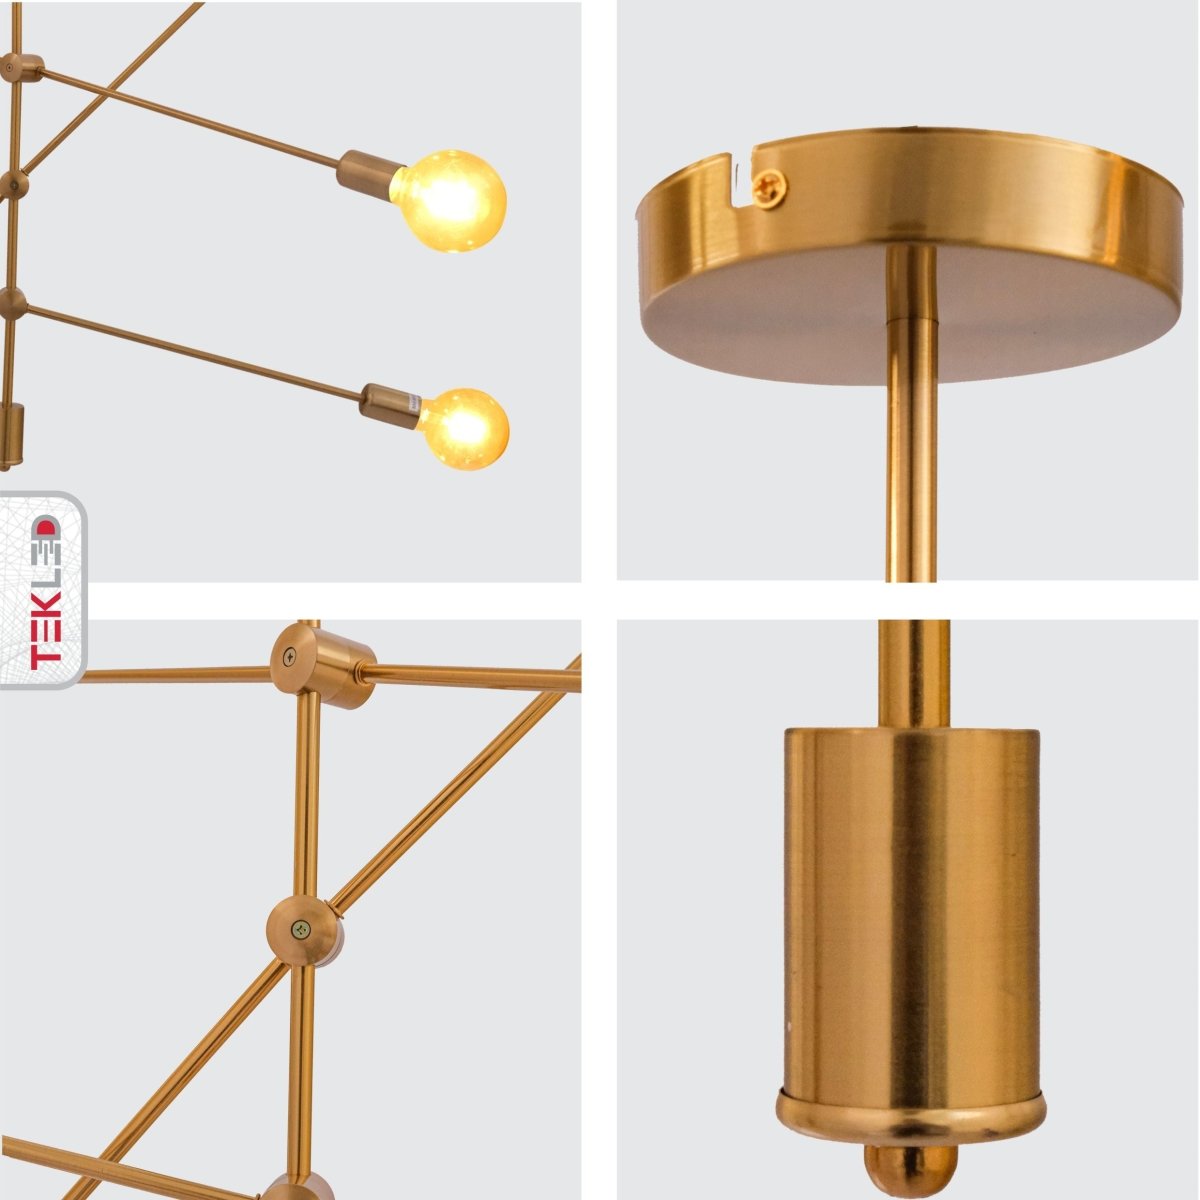 Detailed shots of Gold Rod Modern Pendant Tiered Chandelier Light with 6xE27 Fittings | TEKLED 159-17574